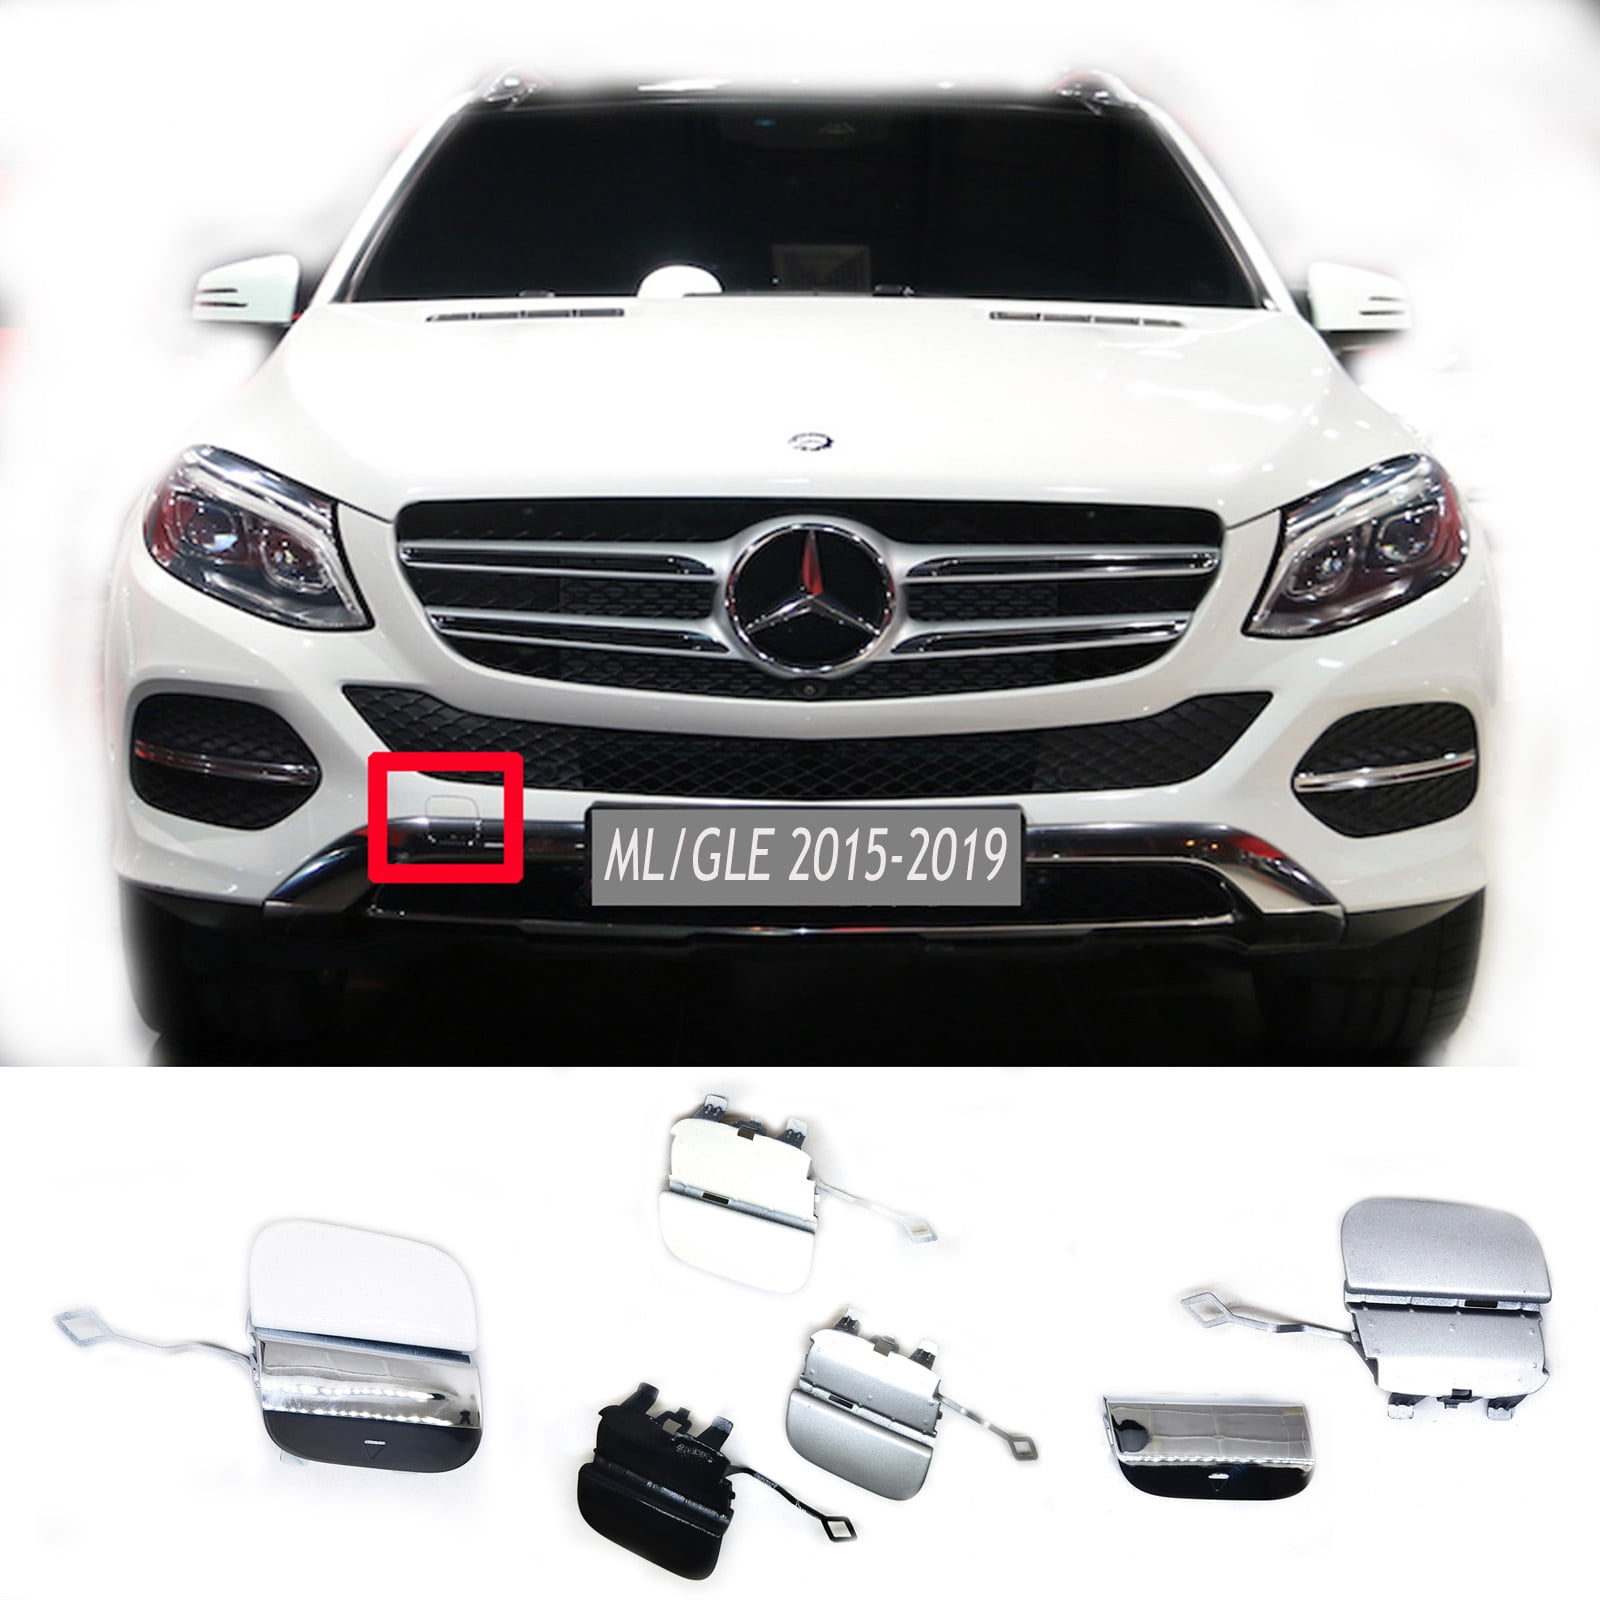 Trimla 2in1 Front Tow Cover for 15-19 Mercedes Benz X166 Fit ML